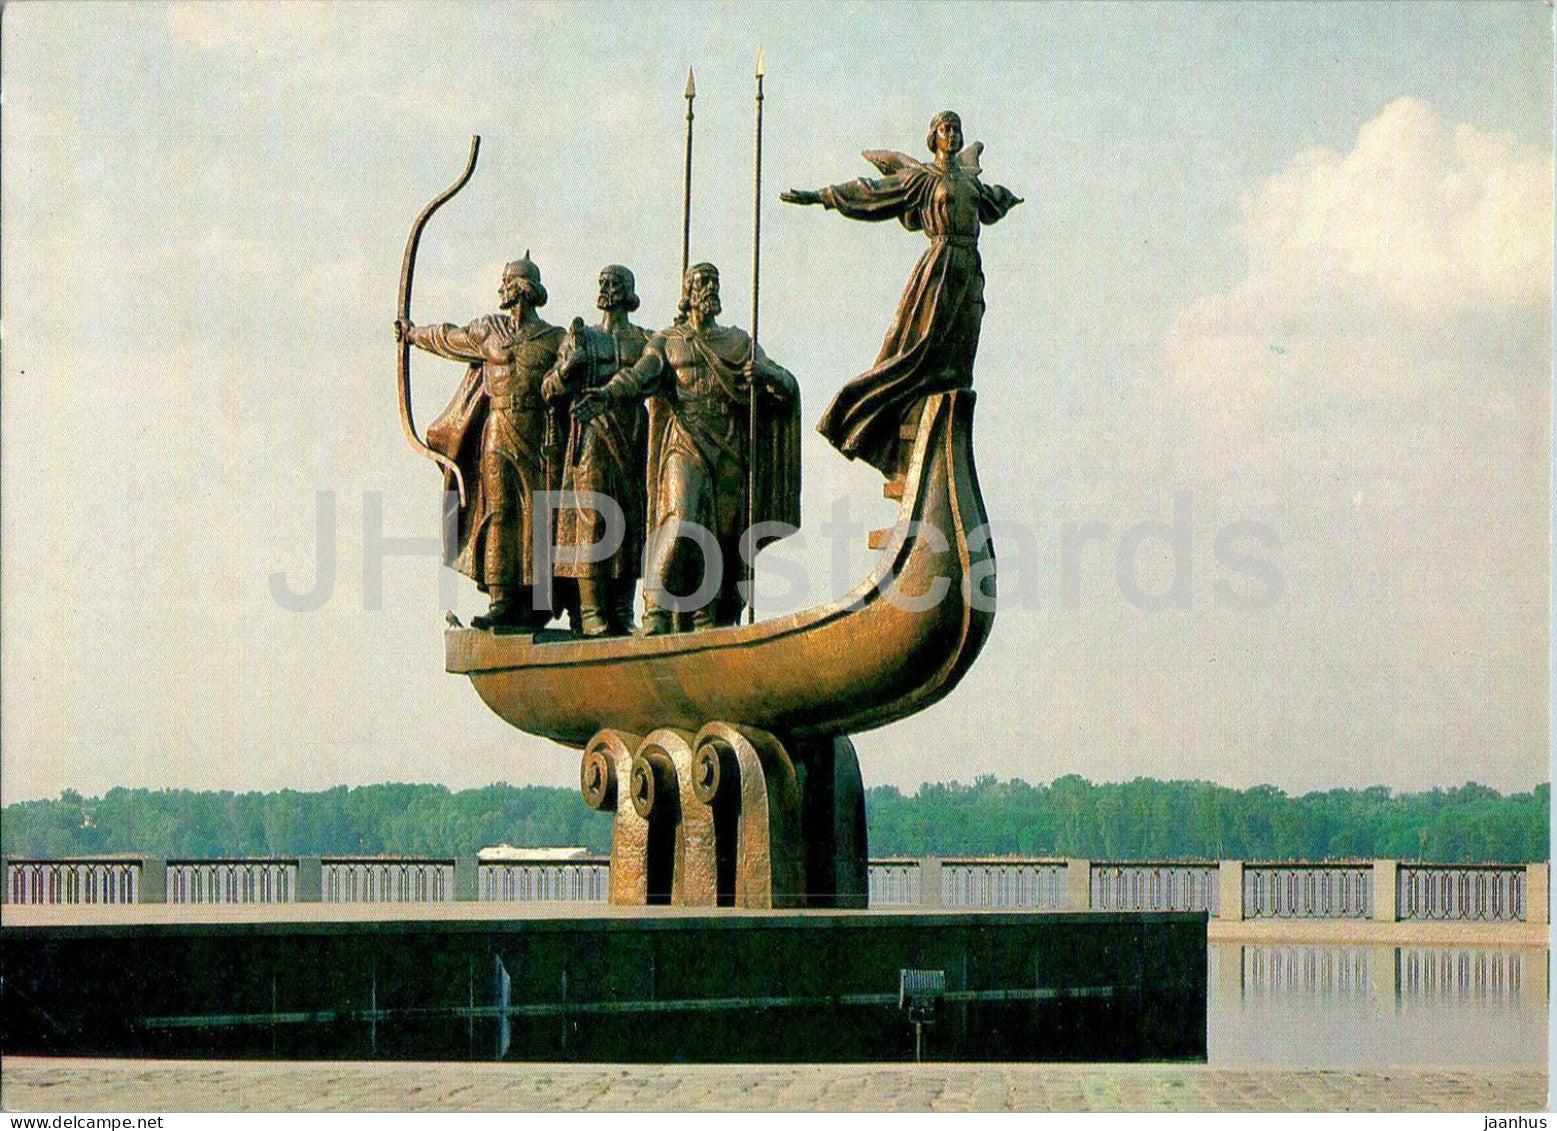 Kyiv - Kiev - Boat - monument to the founders of the city - 1989 - Ukraine USSR - unused - JH Postcards